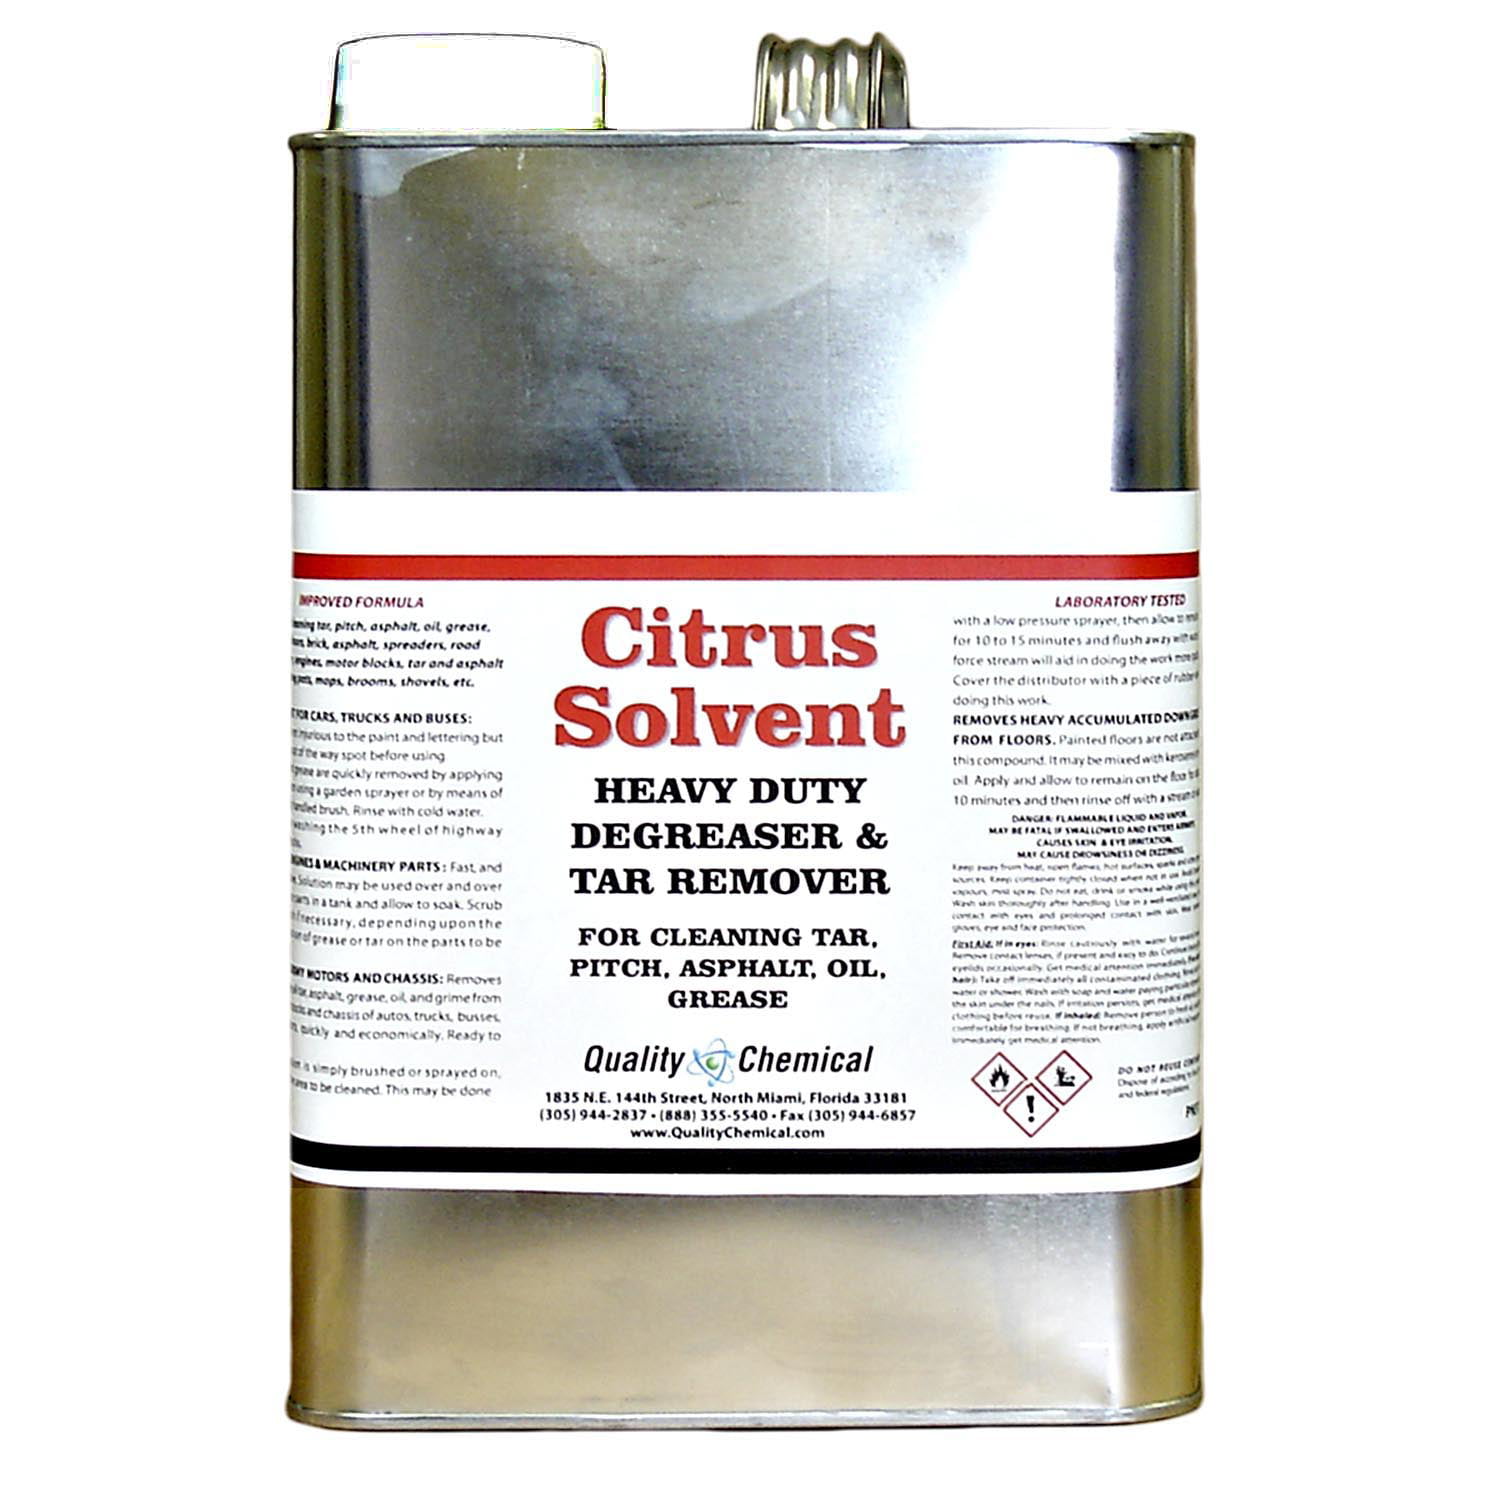 Quality Chemical Company - Citrus Solvent Degreaser & Tar Remover